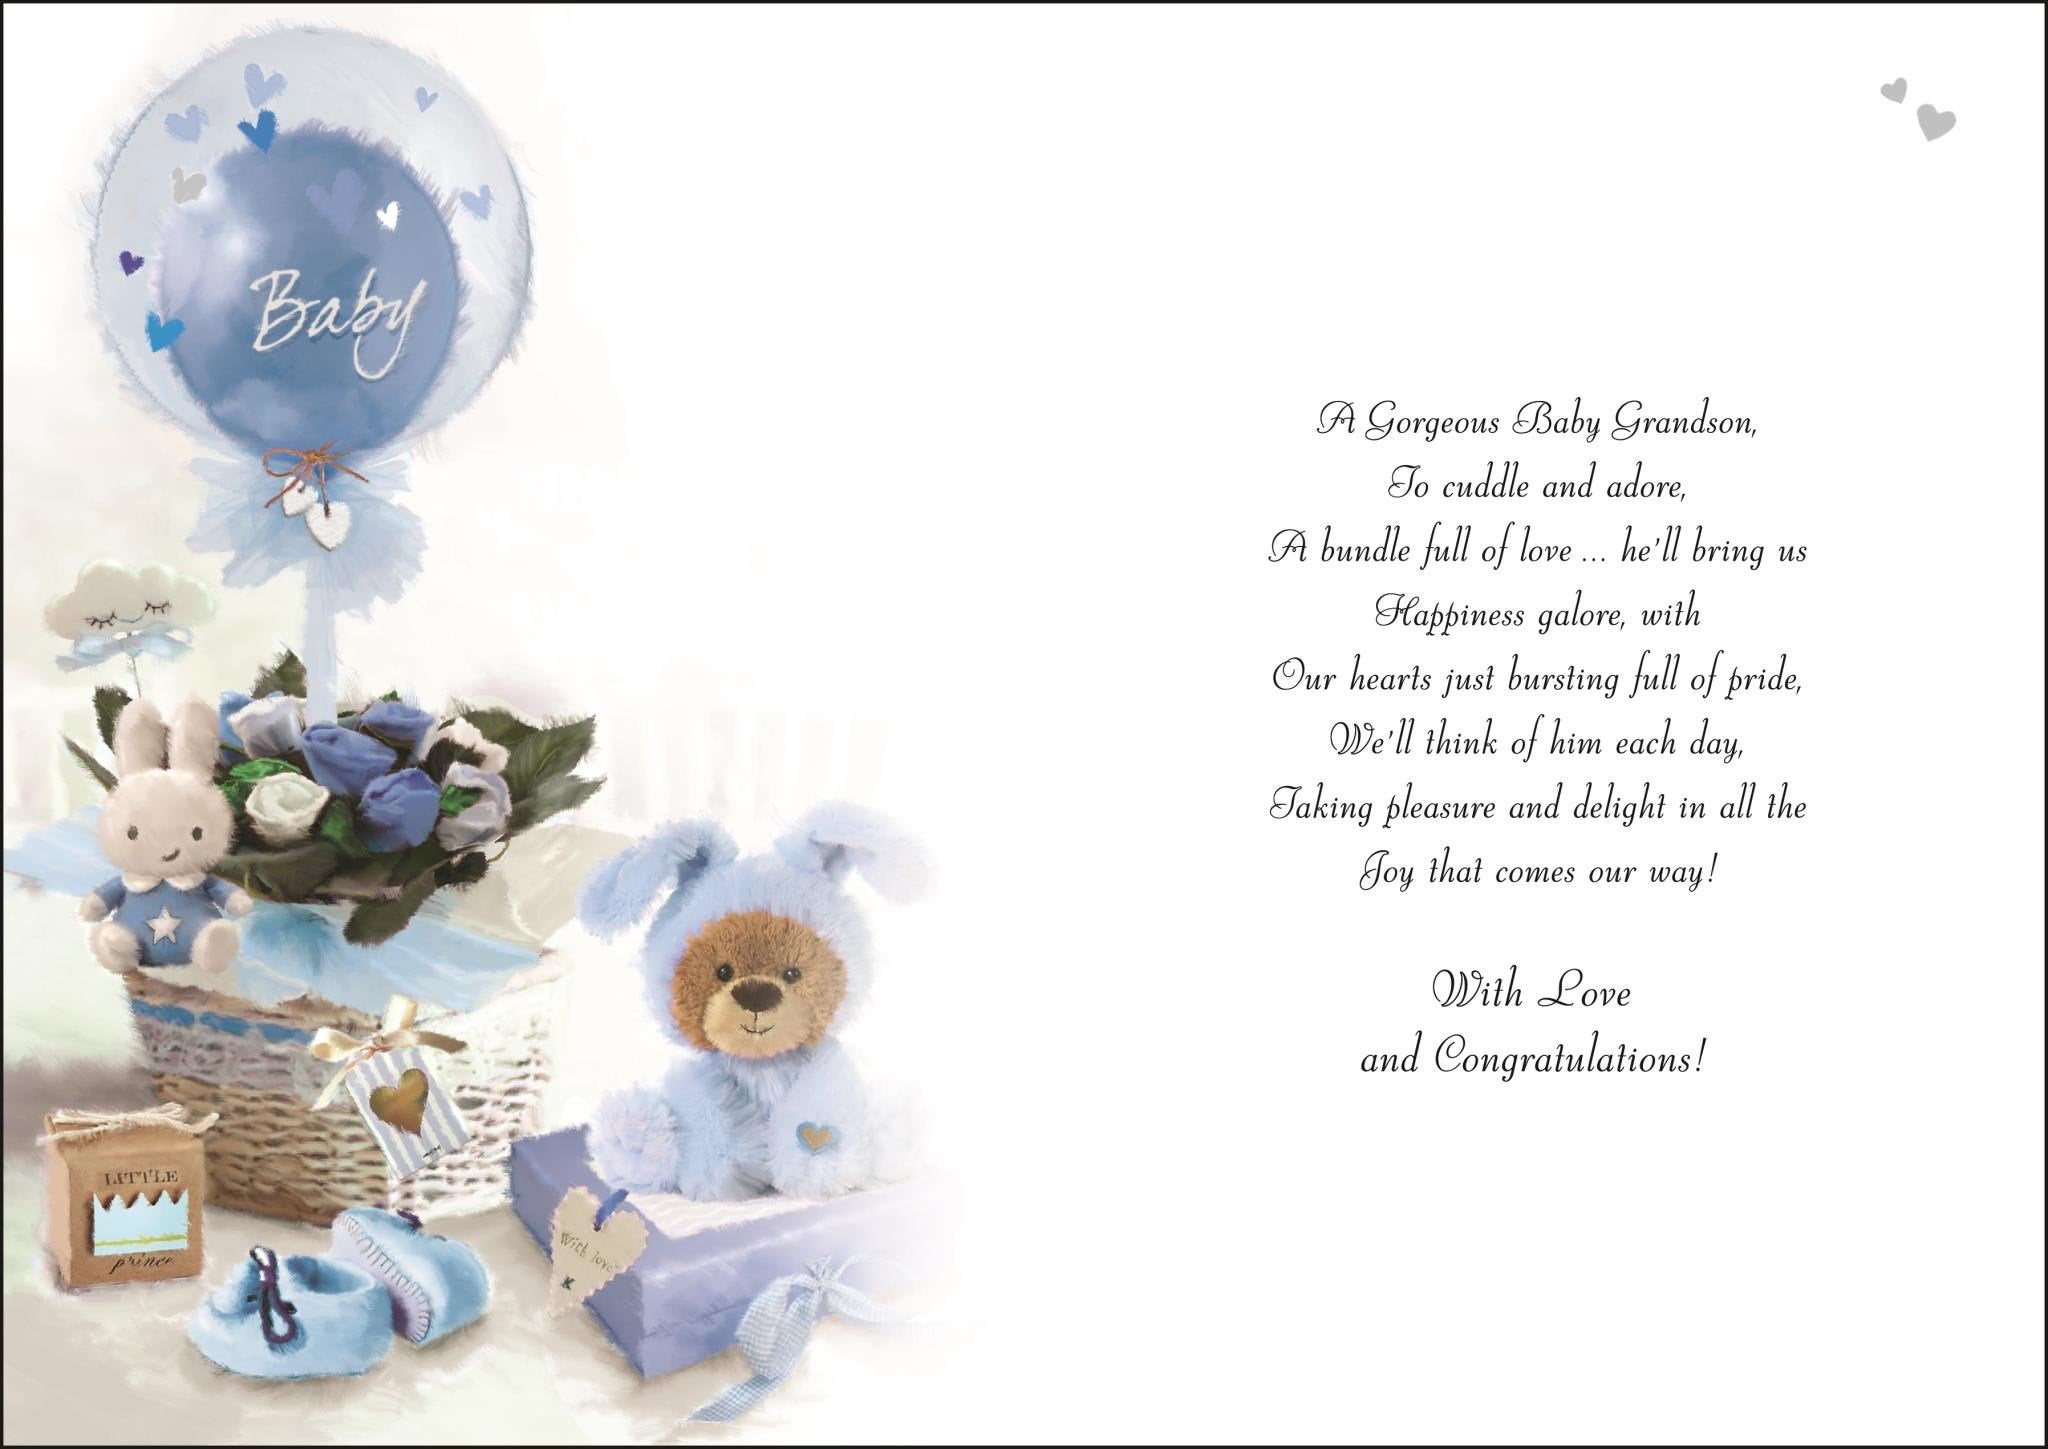 Inside of Thank You for a Grandson Greetings Card